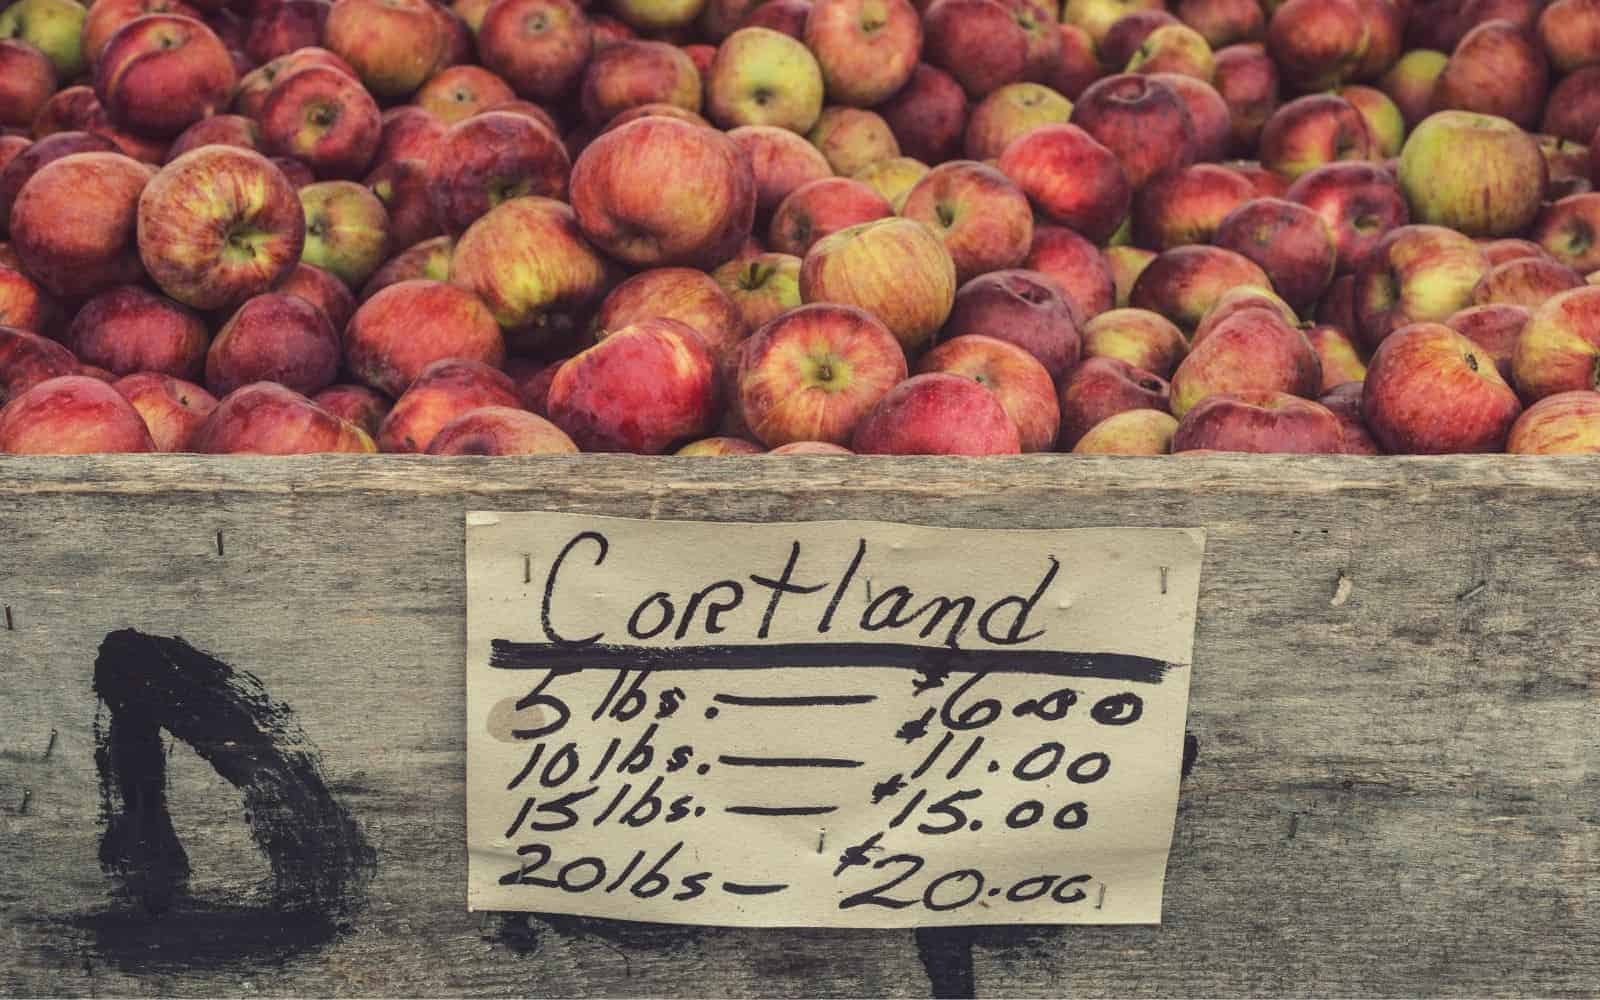 Cortland apples - prices on a sign